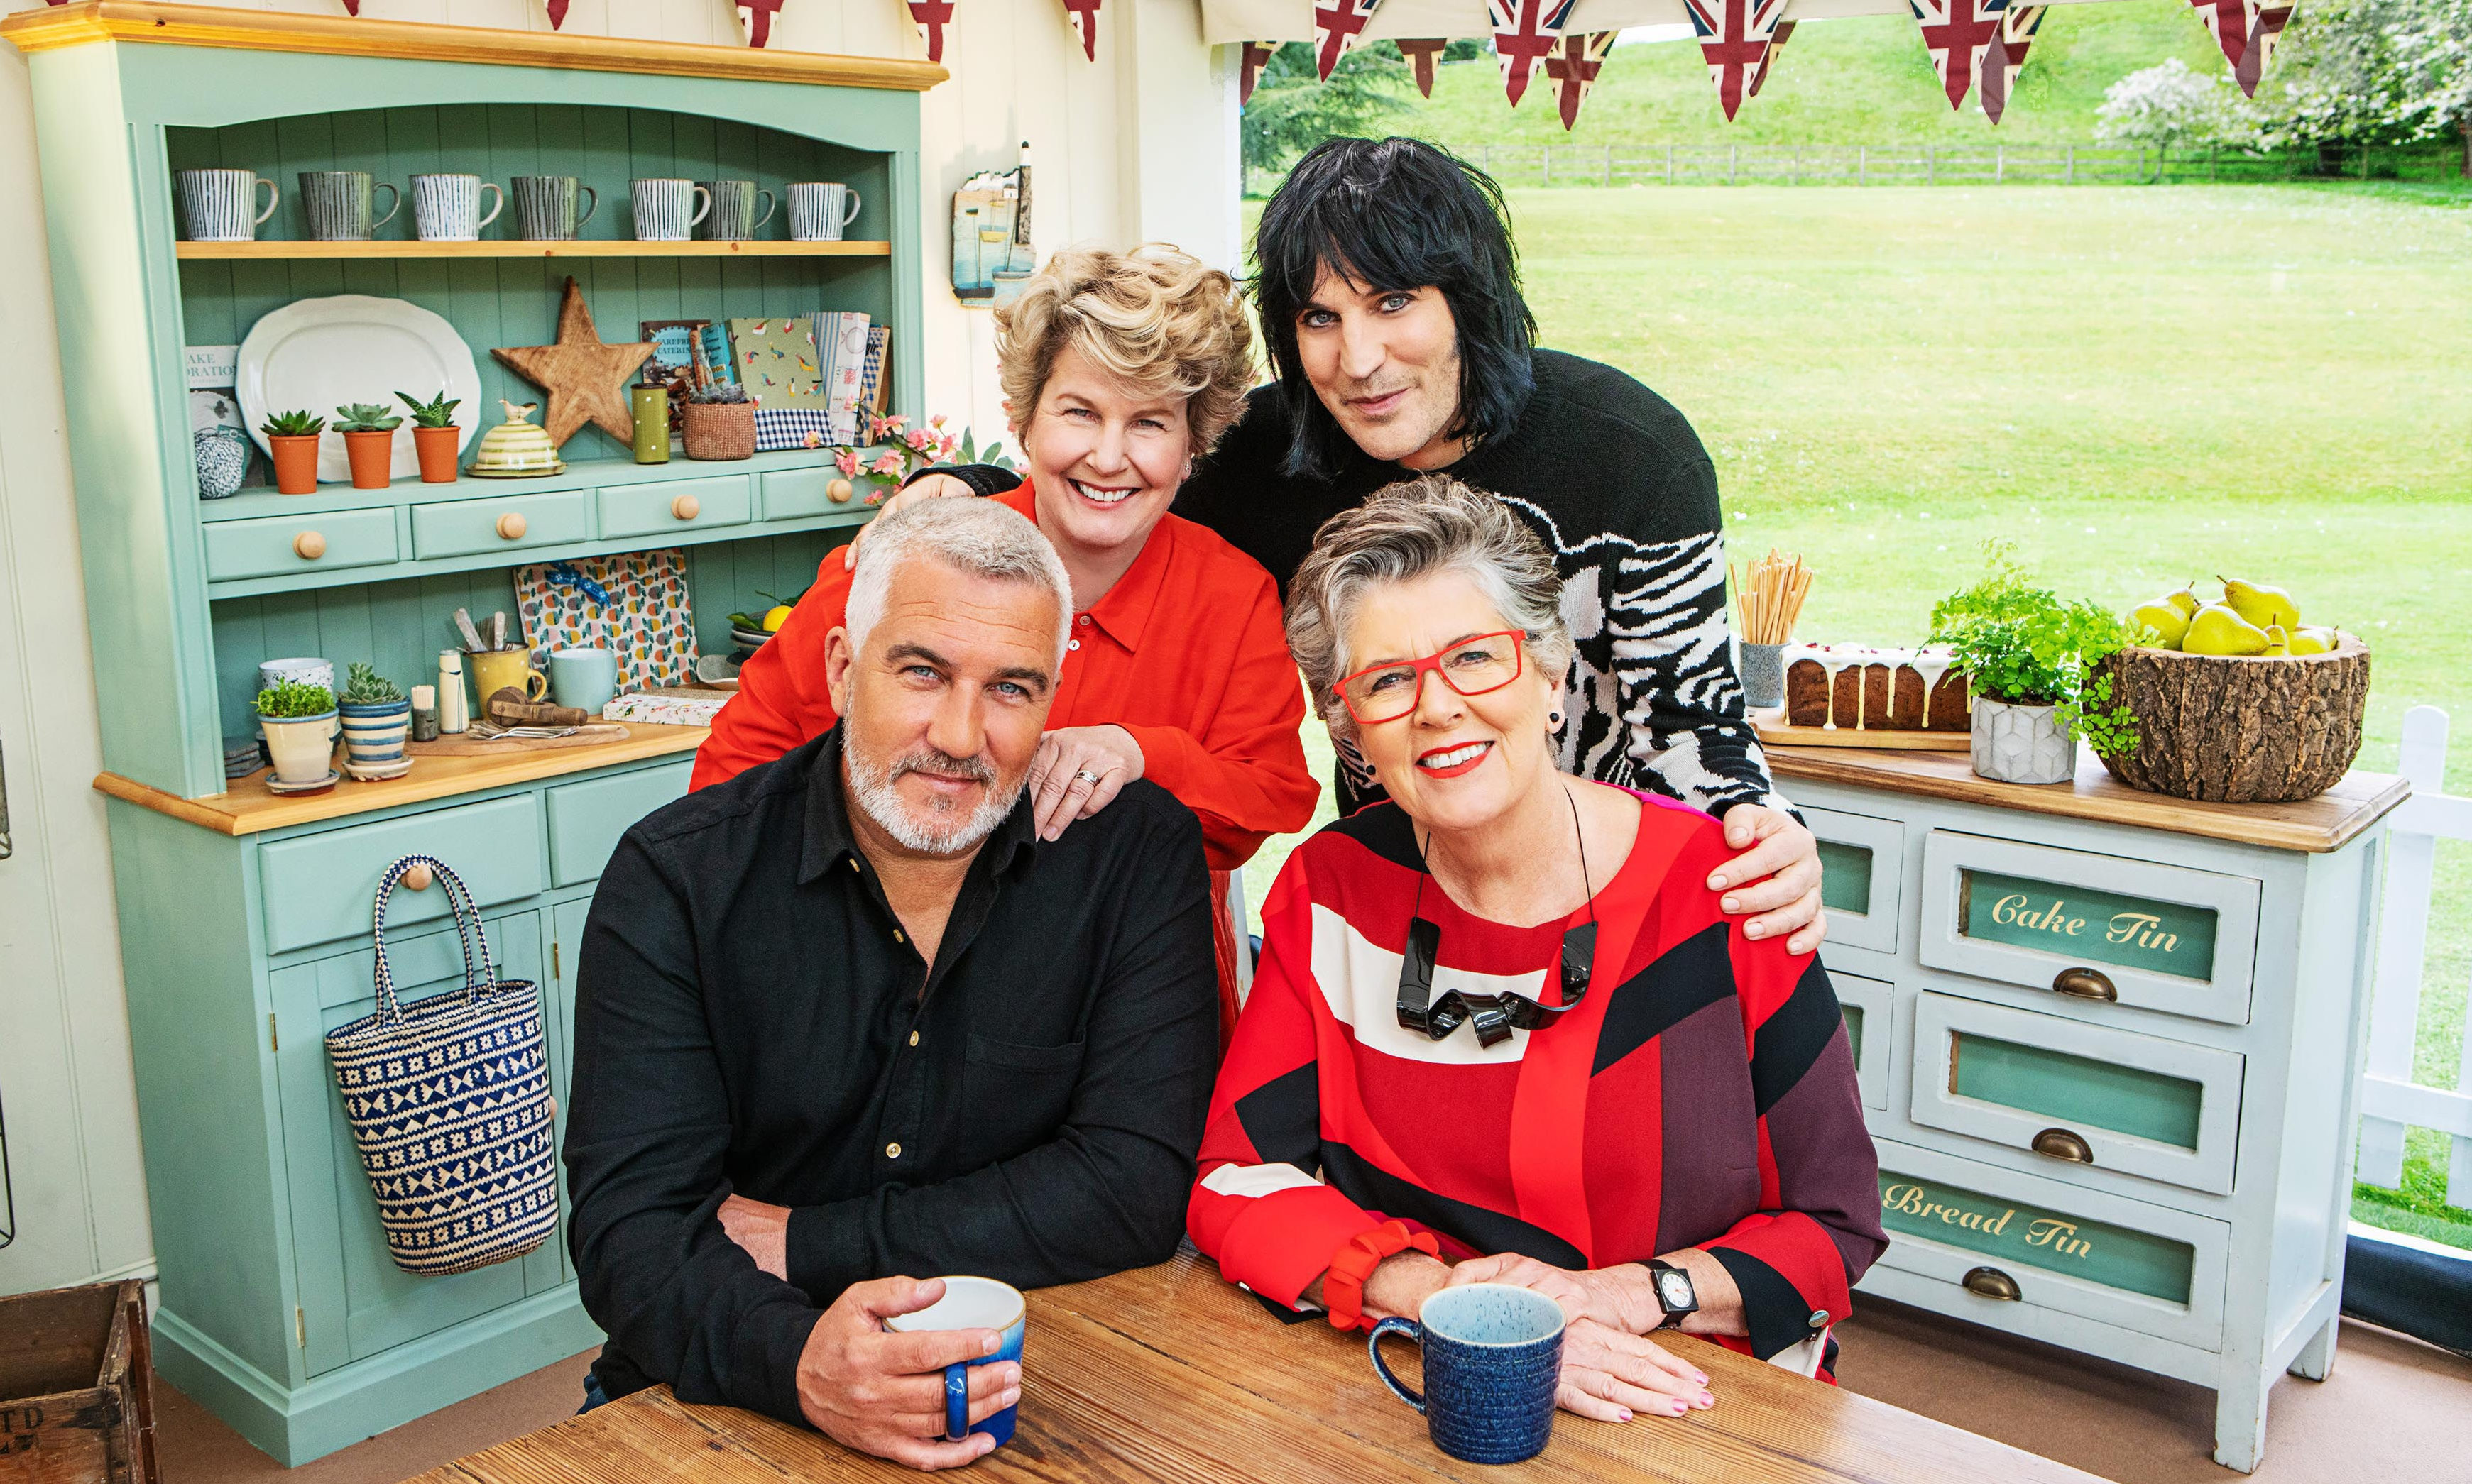 The Great British Bake Off presenters (rear left to right) Sandi Toksvig and Noel Fielding with (front left to right) Paul Hollywood and Prue Leith.